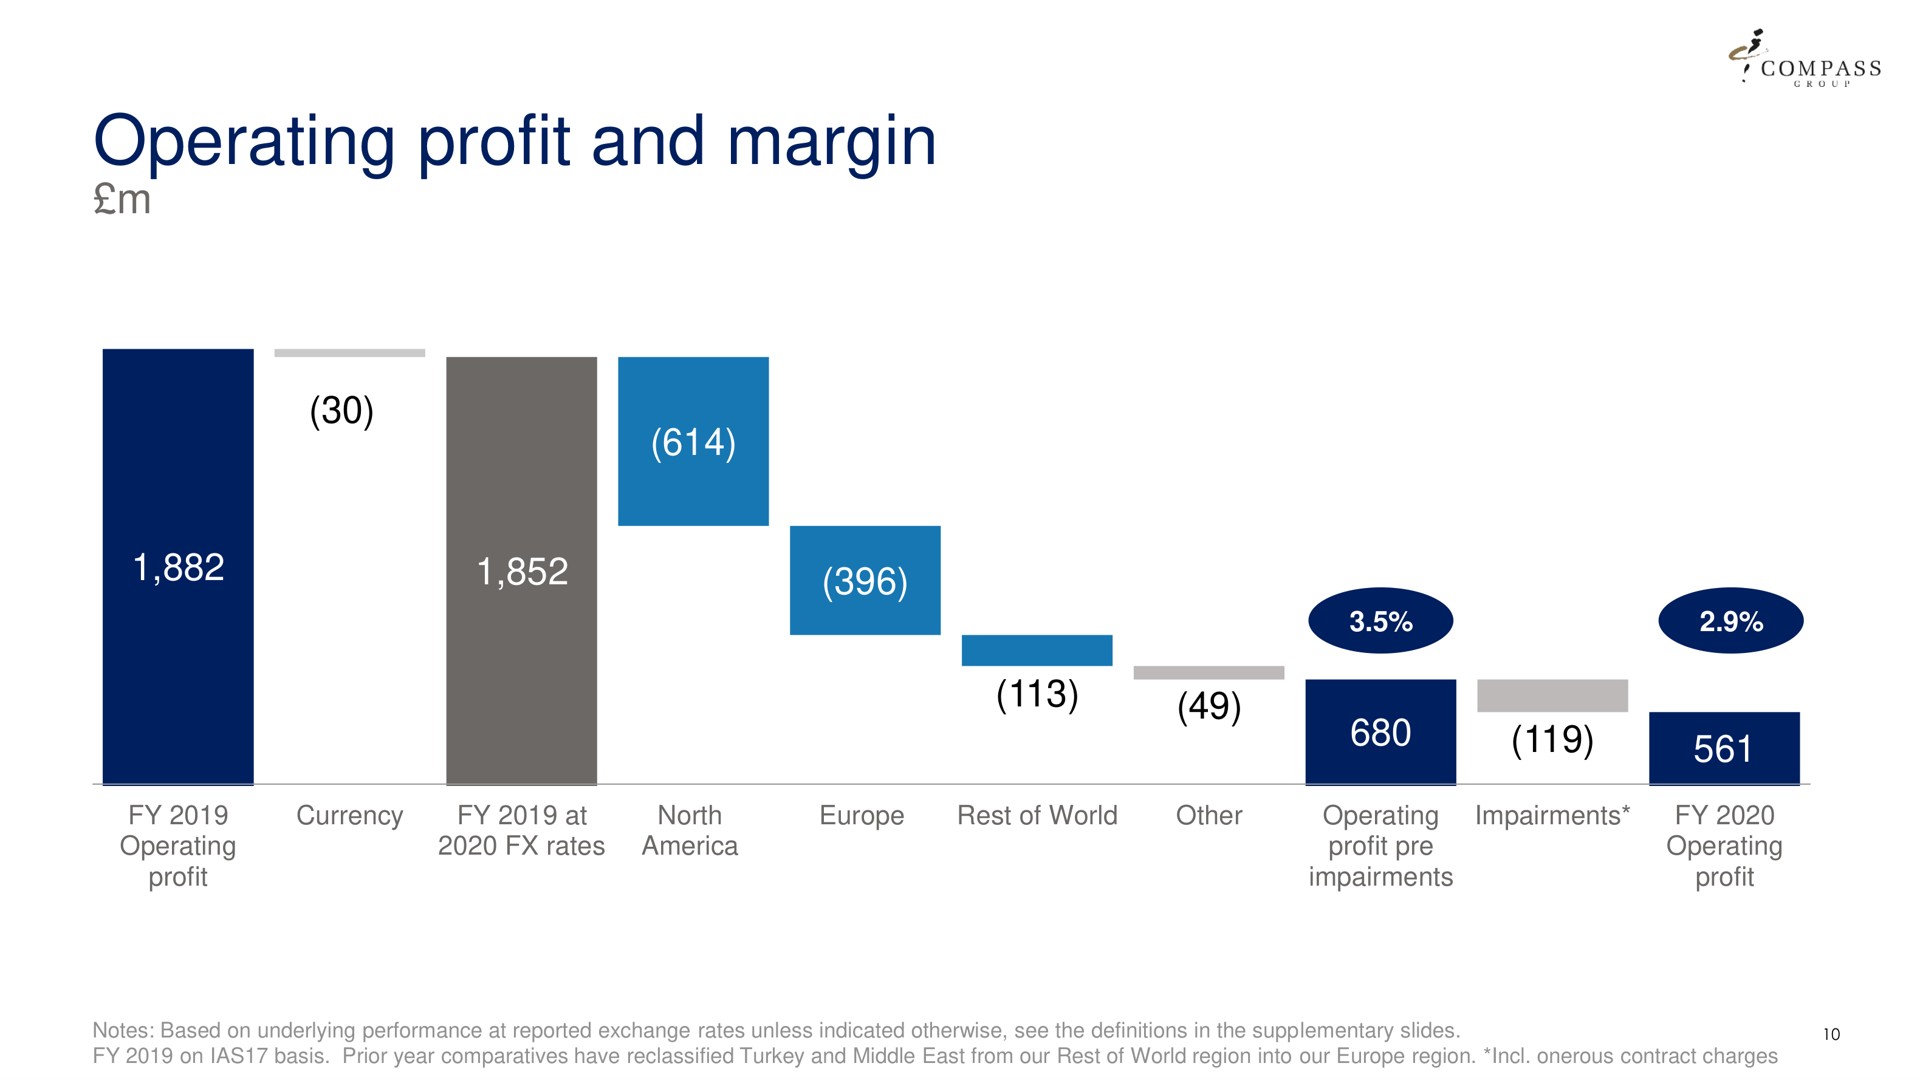 operating profit and margin | Compass Group